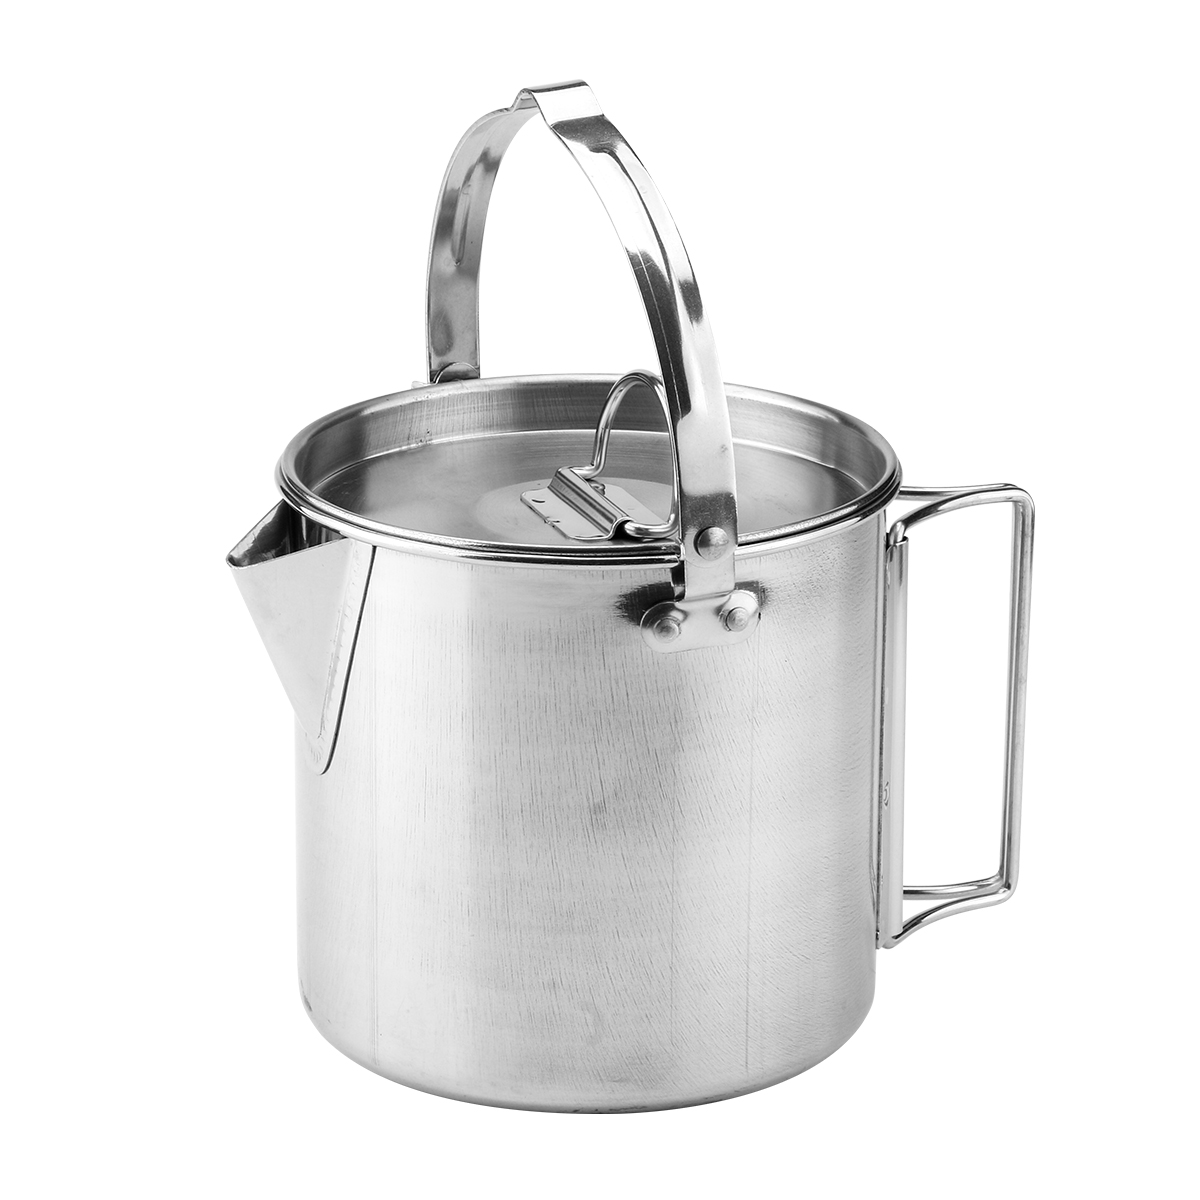 Camping Hanging Pot Stainless Steel Teakettle